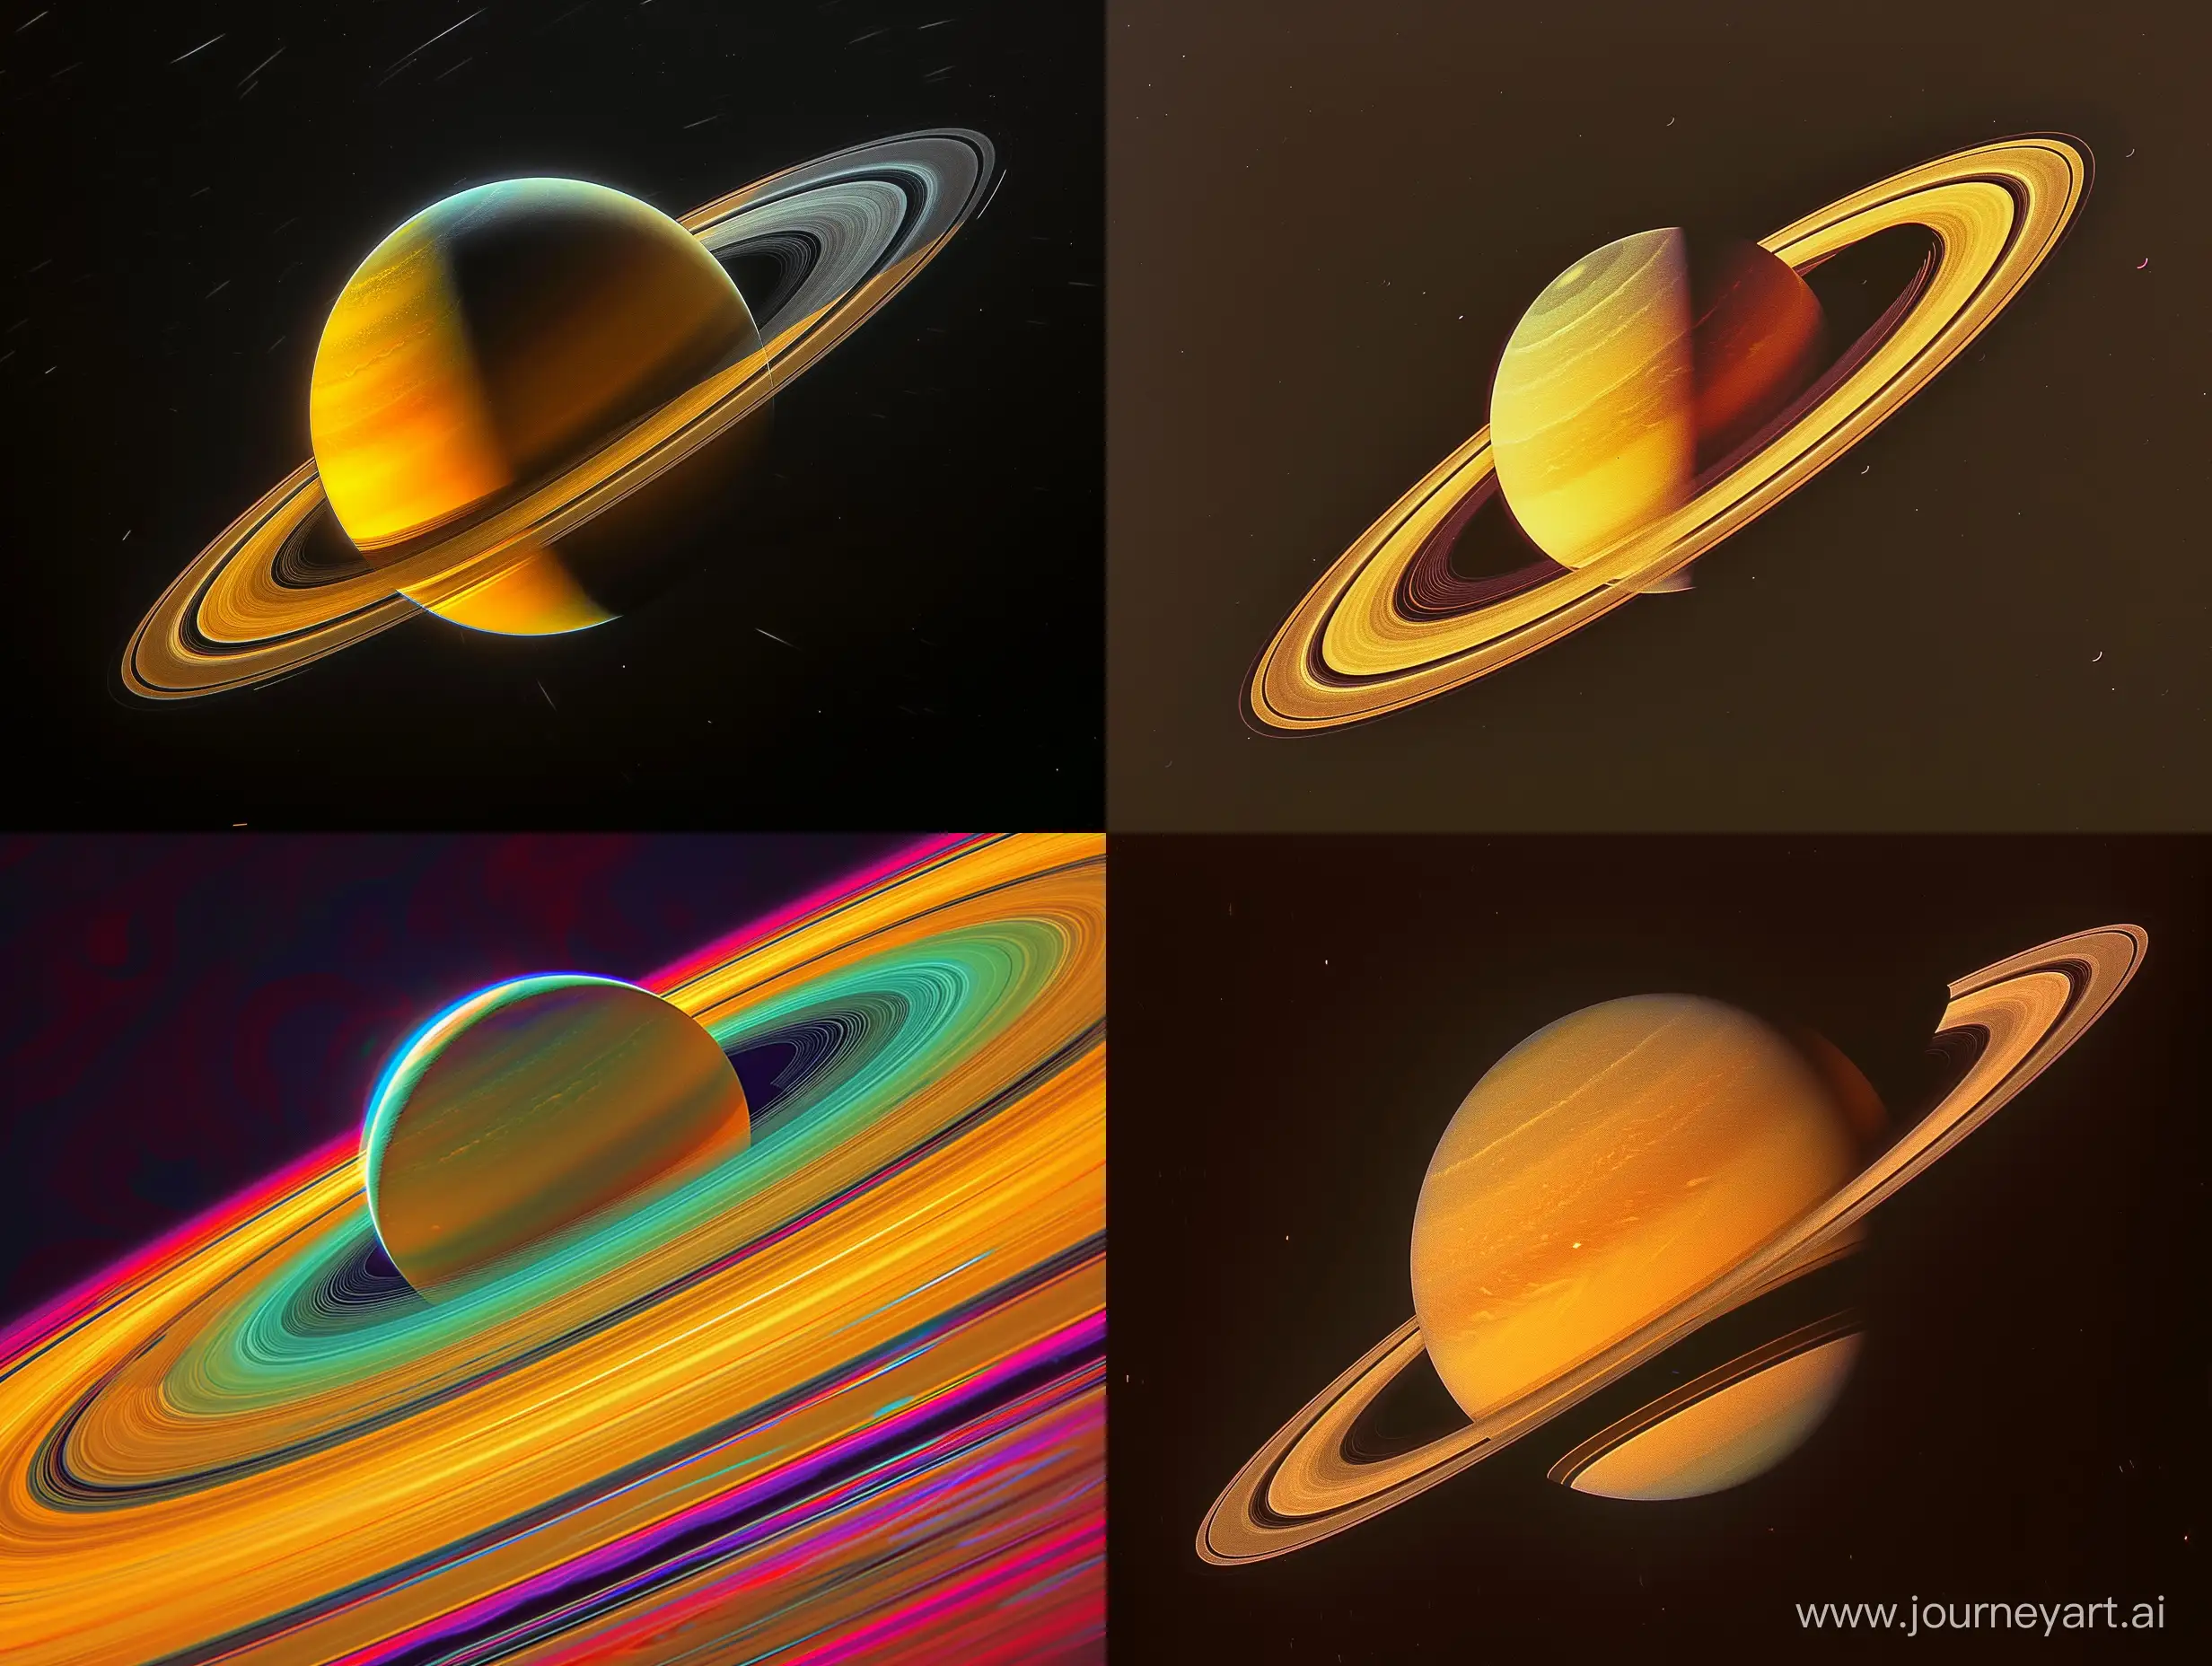 Saturns-Rings-Captured-by-CassiniHuygens-Authentic-Documentary-Photography